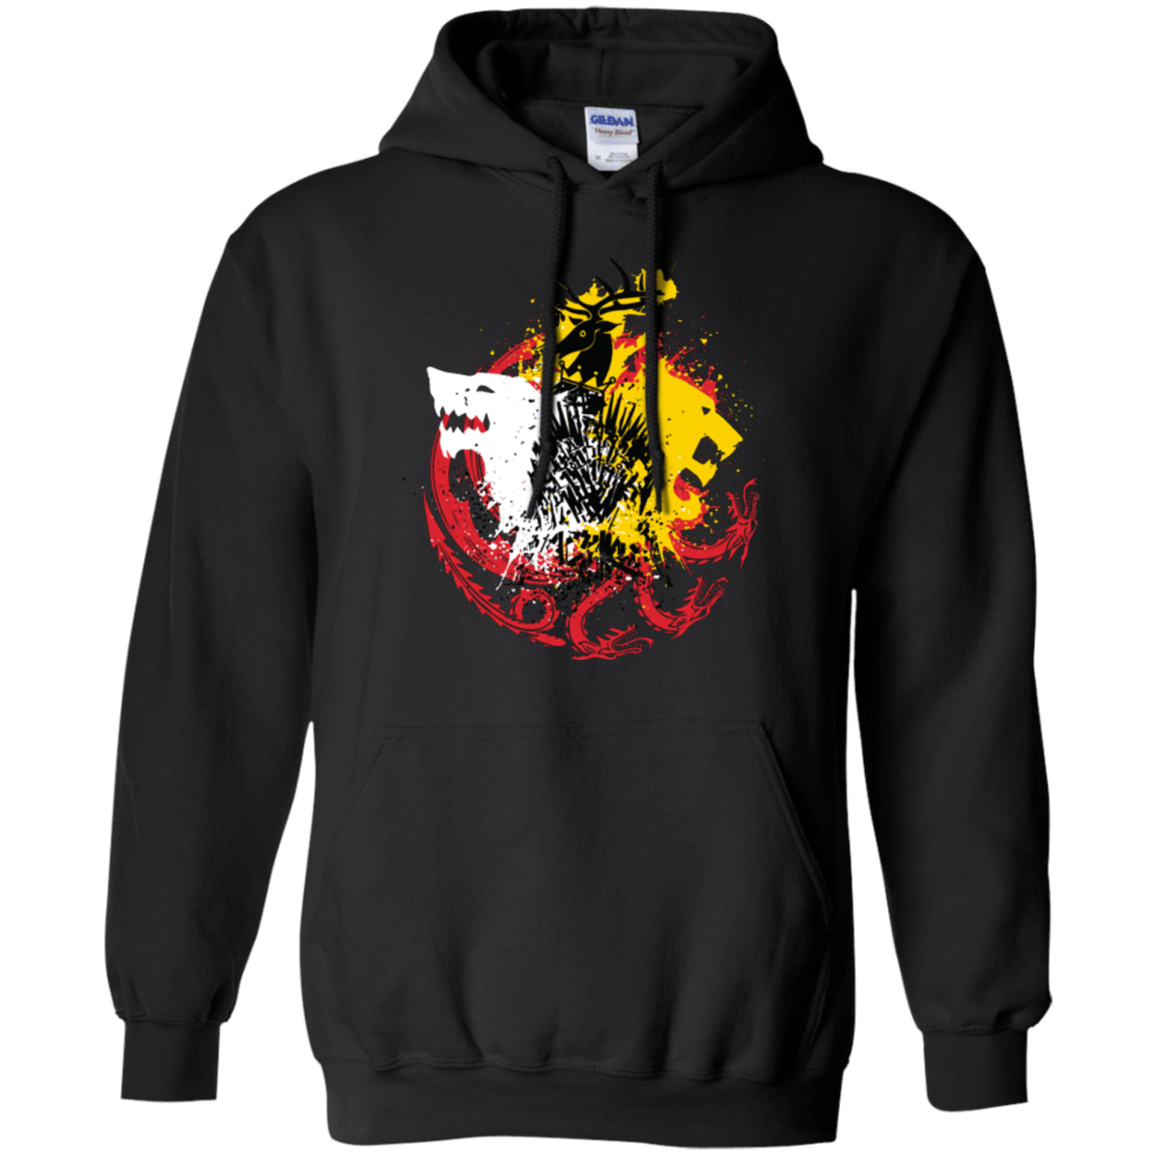 Sweatshirts Black / Small GAME OF COLORS Pullover Hoodie